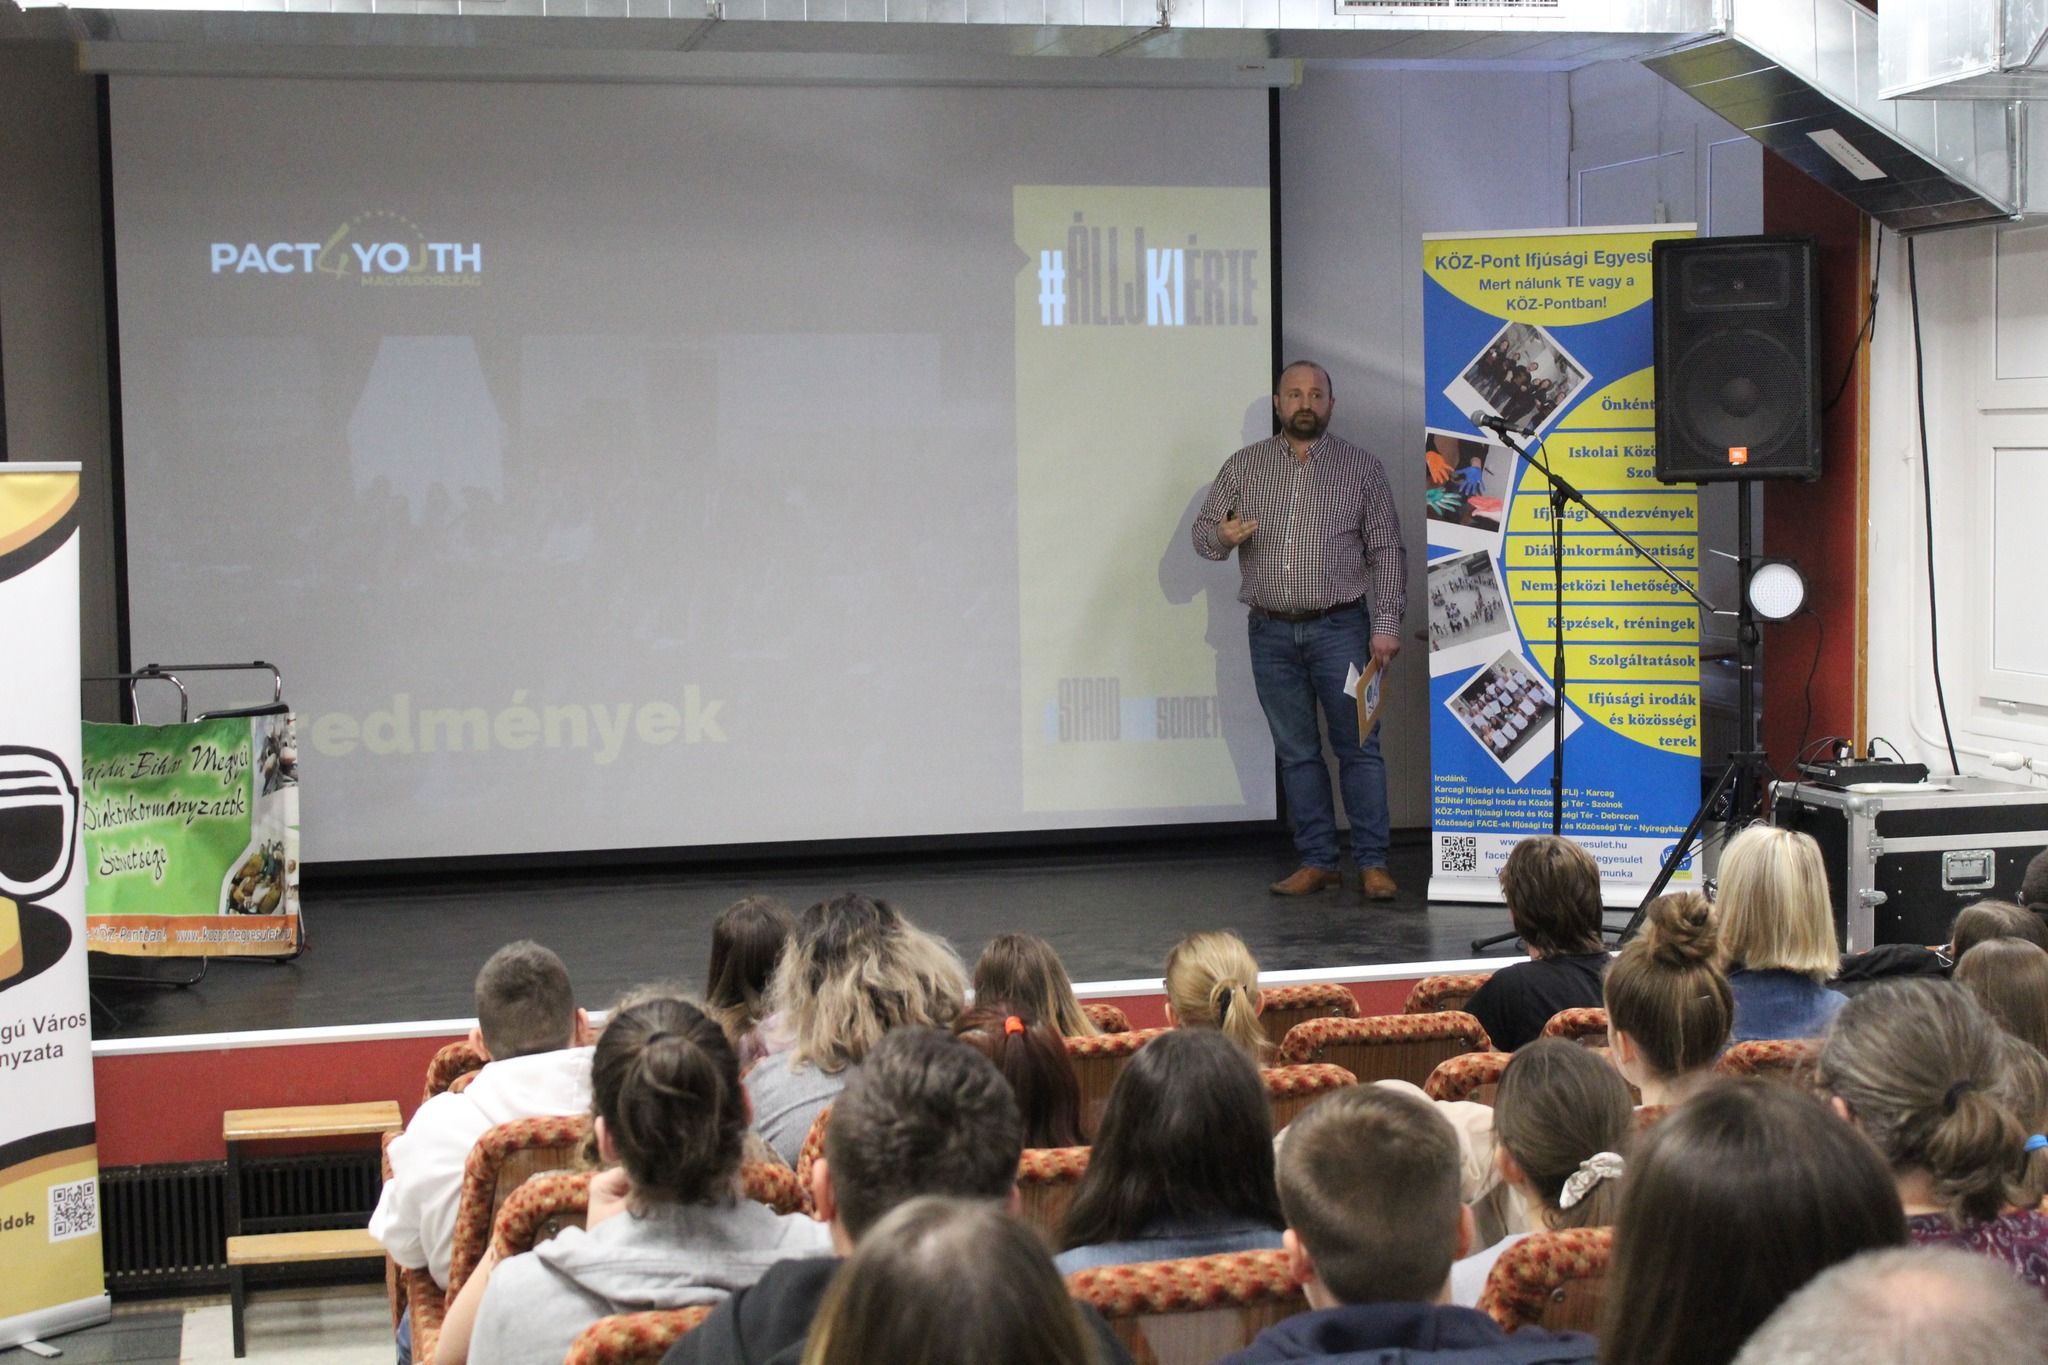 The County Student Forum in Debrecen – Introducing the #Standforsomething campaign